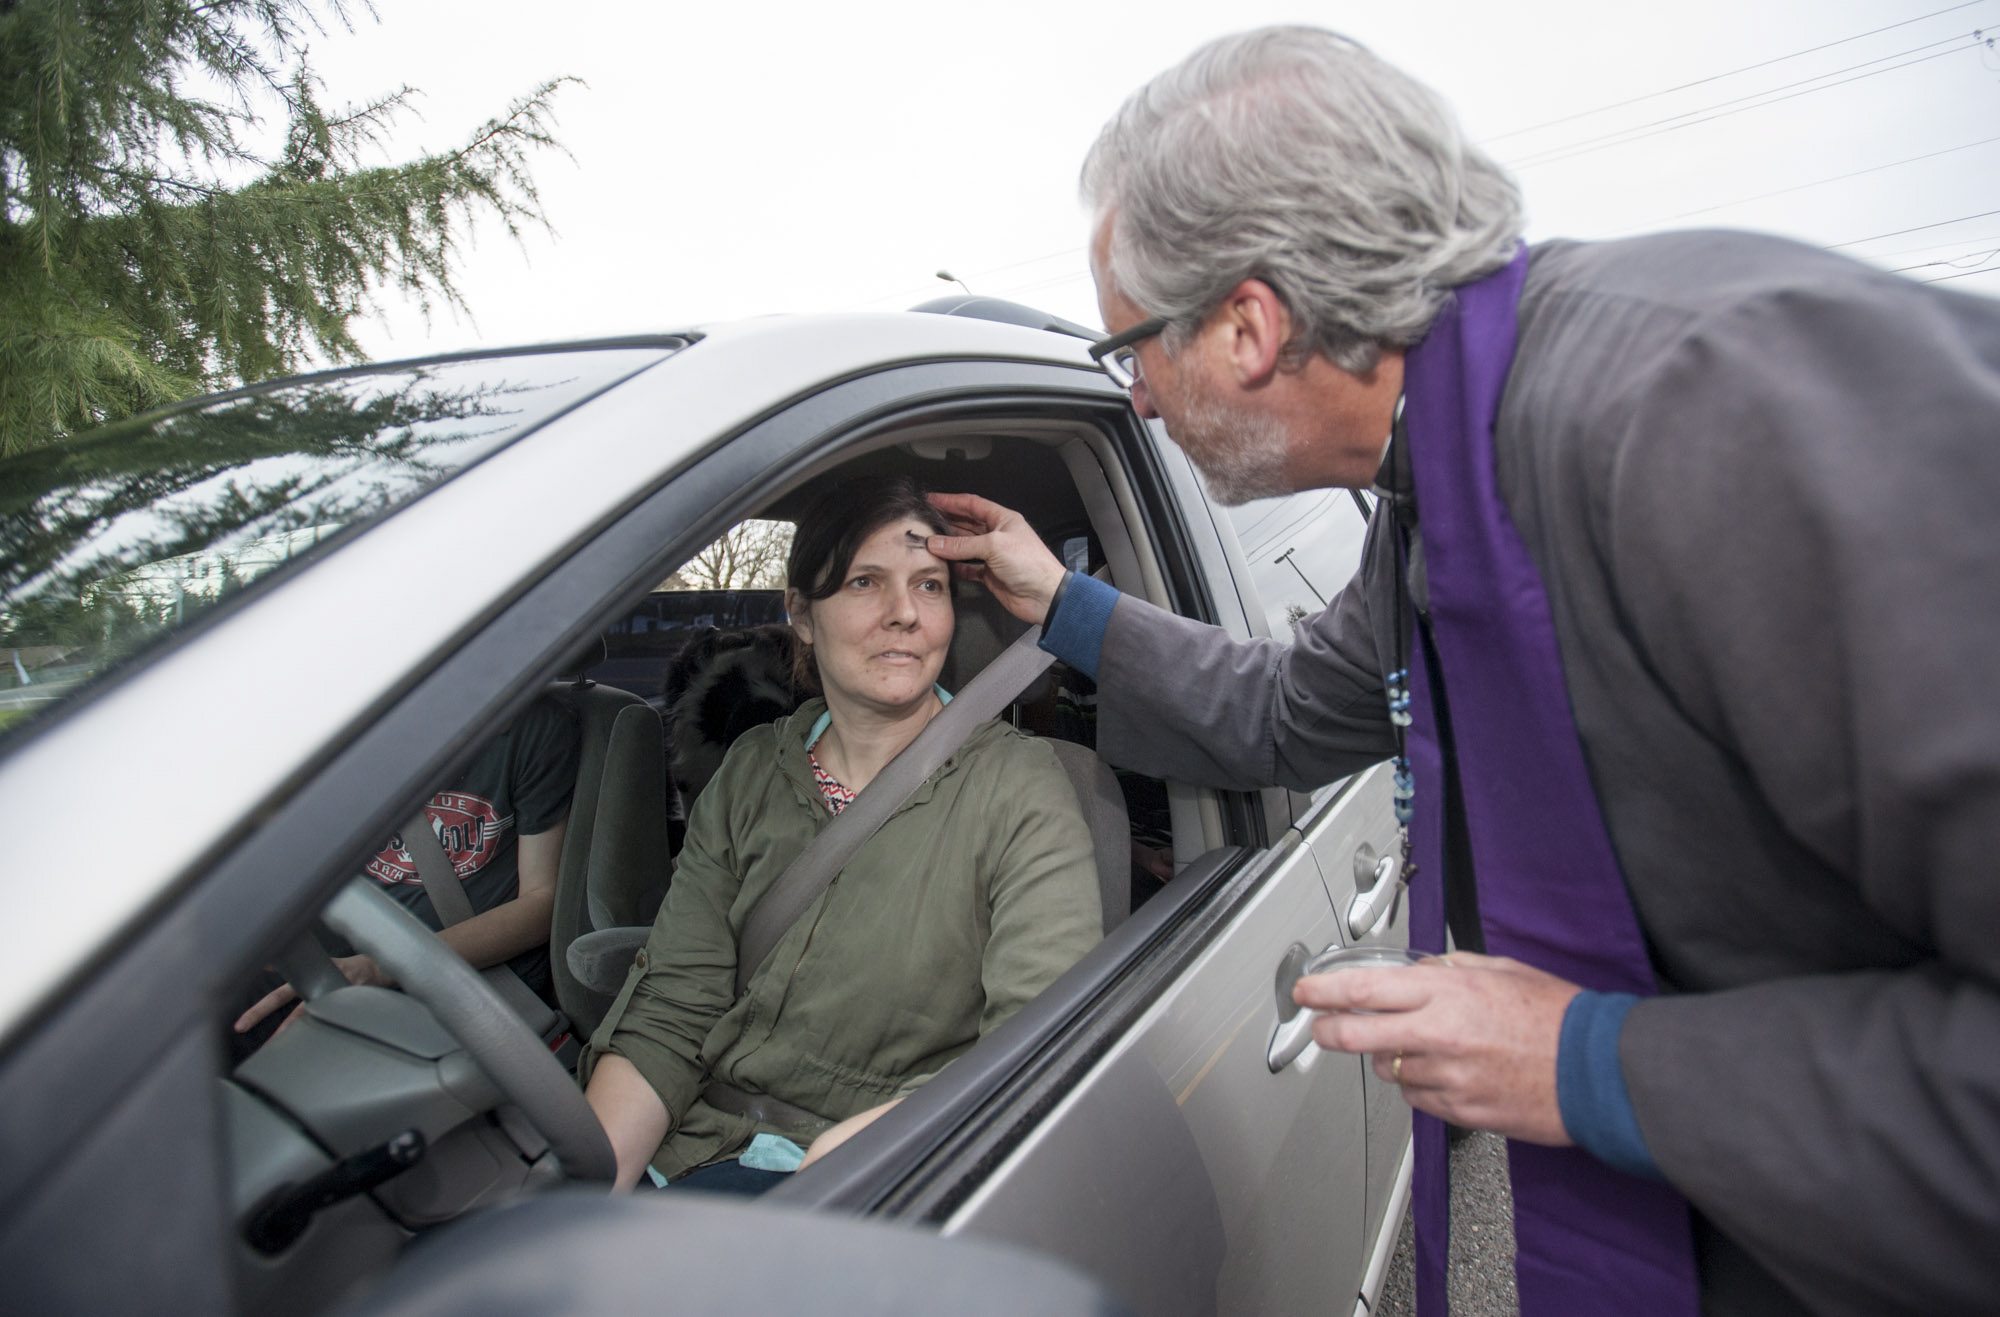 The Reverend Tom Warne offers  "Ashes to Go "  to passersby Julie Davis on Ash Wednesday in front of Church of the Good Shepherd in Vancouver Wednesday February 10, 2016.